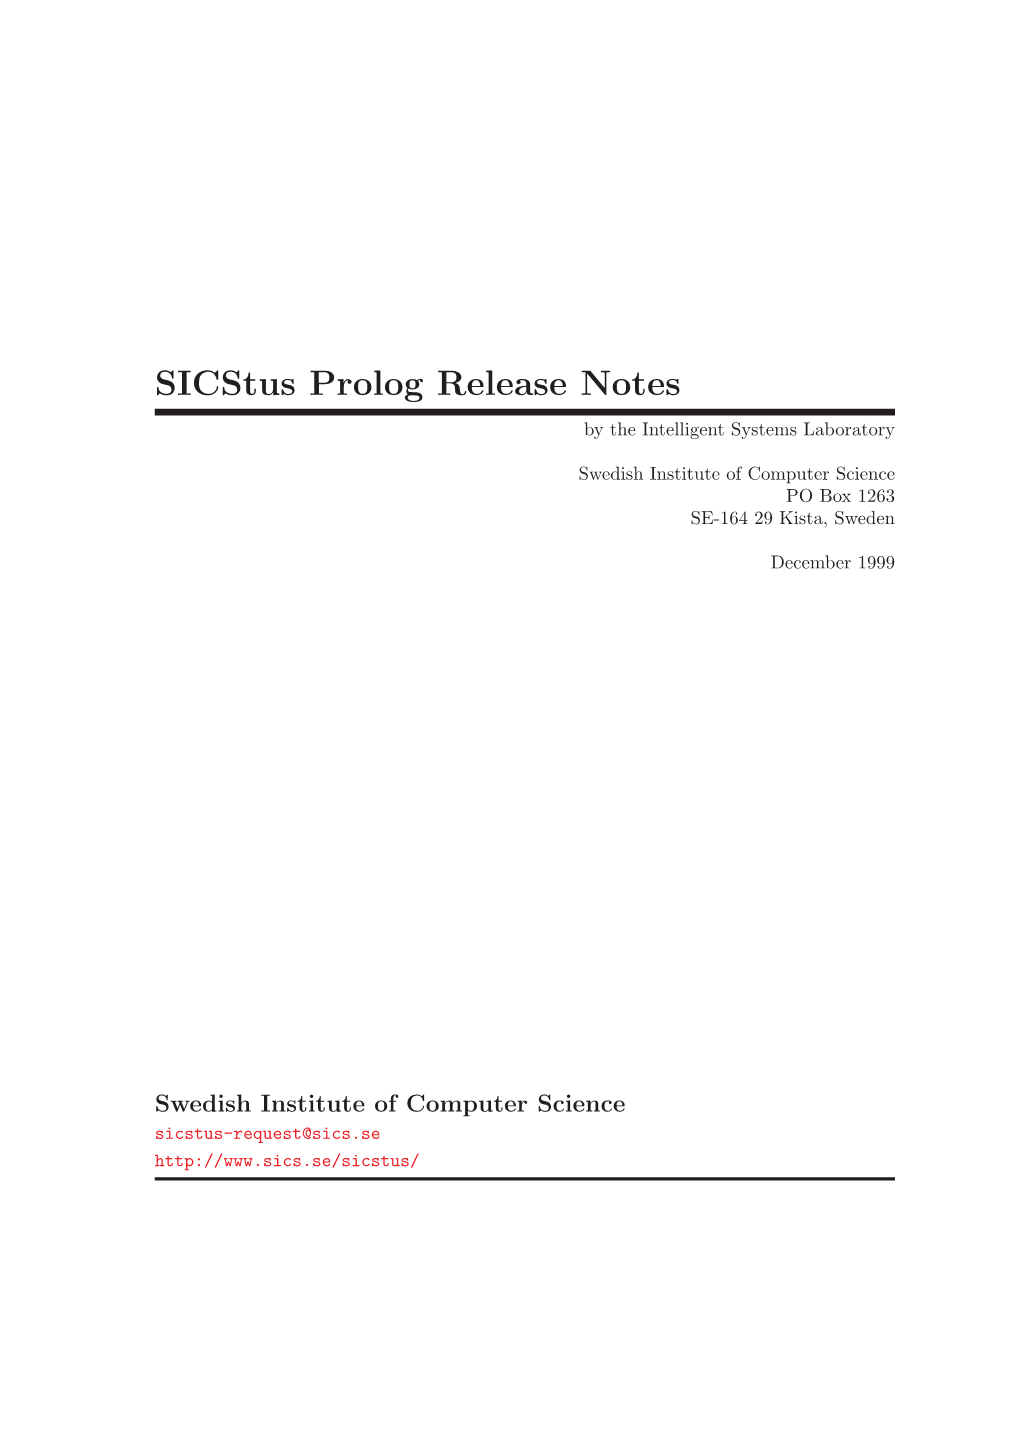 Sicstus Prolog Release Notes by the Intelligent Systems Laboratory